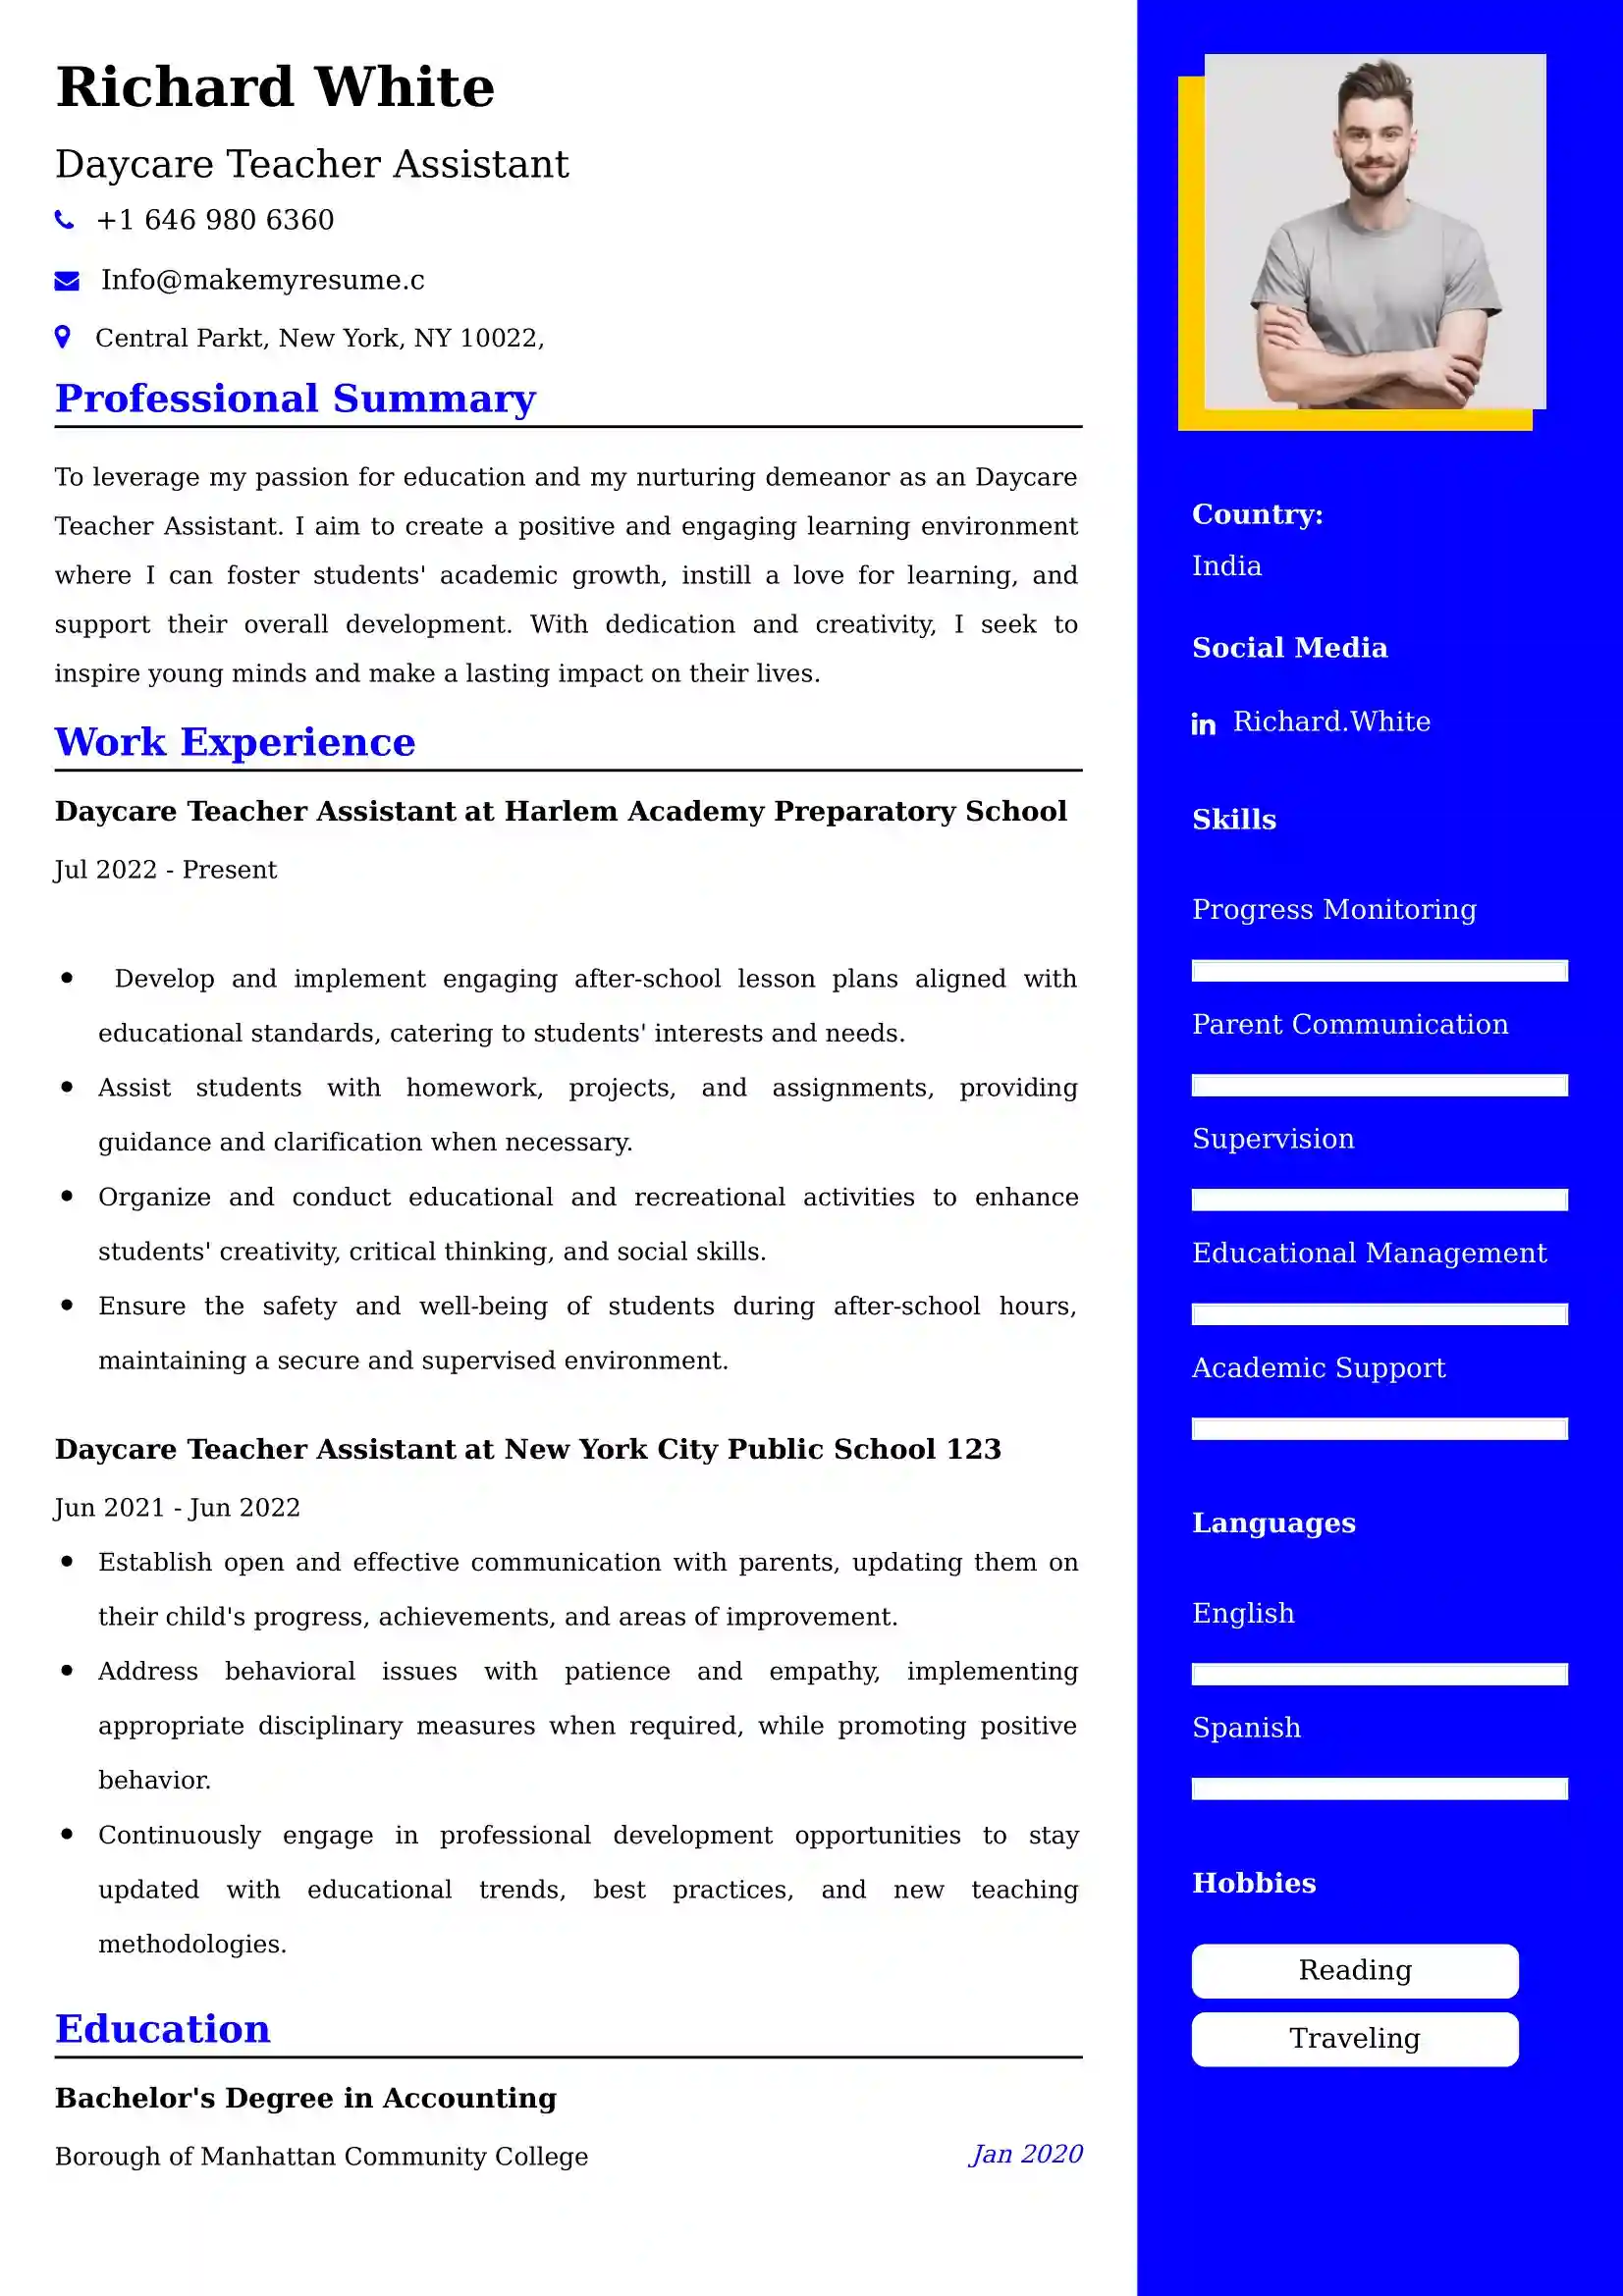 Daycare Teacher Assistant Resume Examples - UK Format, Latest Template.